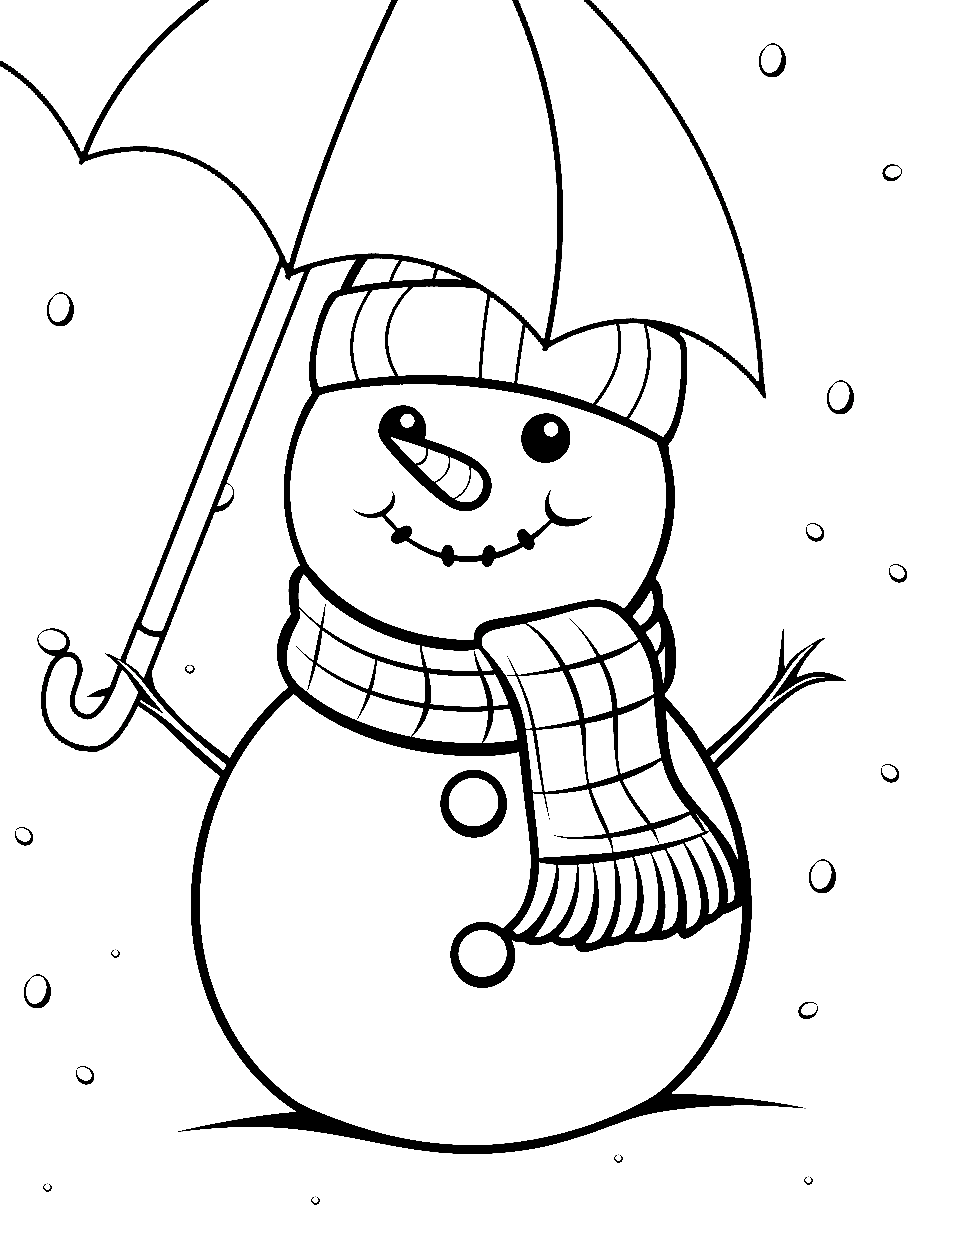 Cute Snowman Holding an Umbrella Coloring Page - A cheerful snowman with a big smile, holding a colorful umbrella.